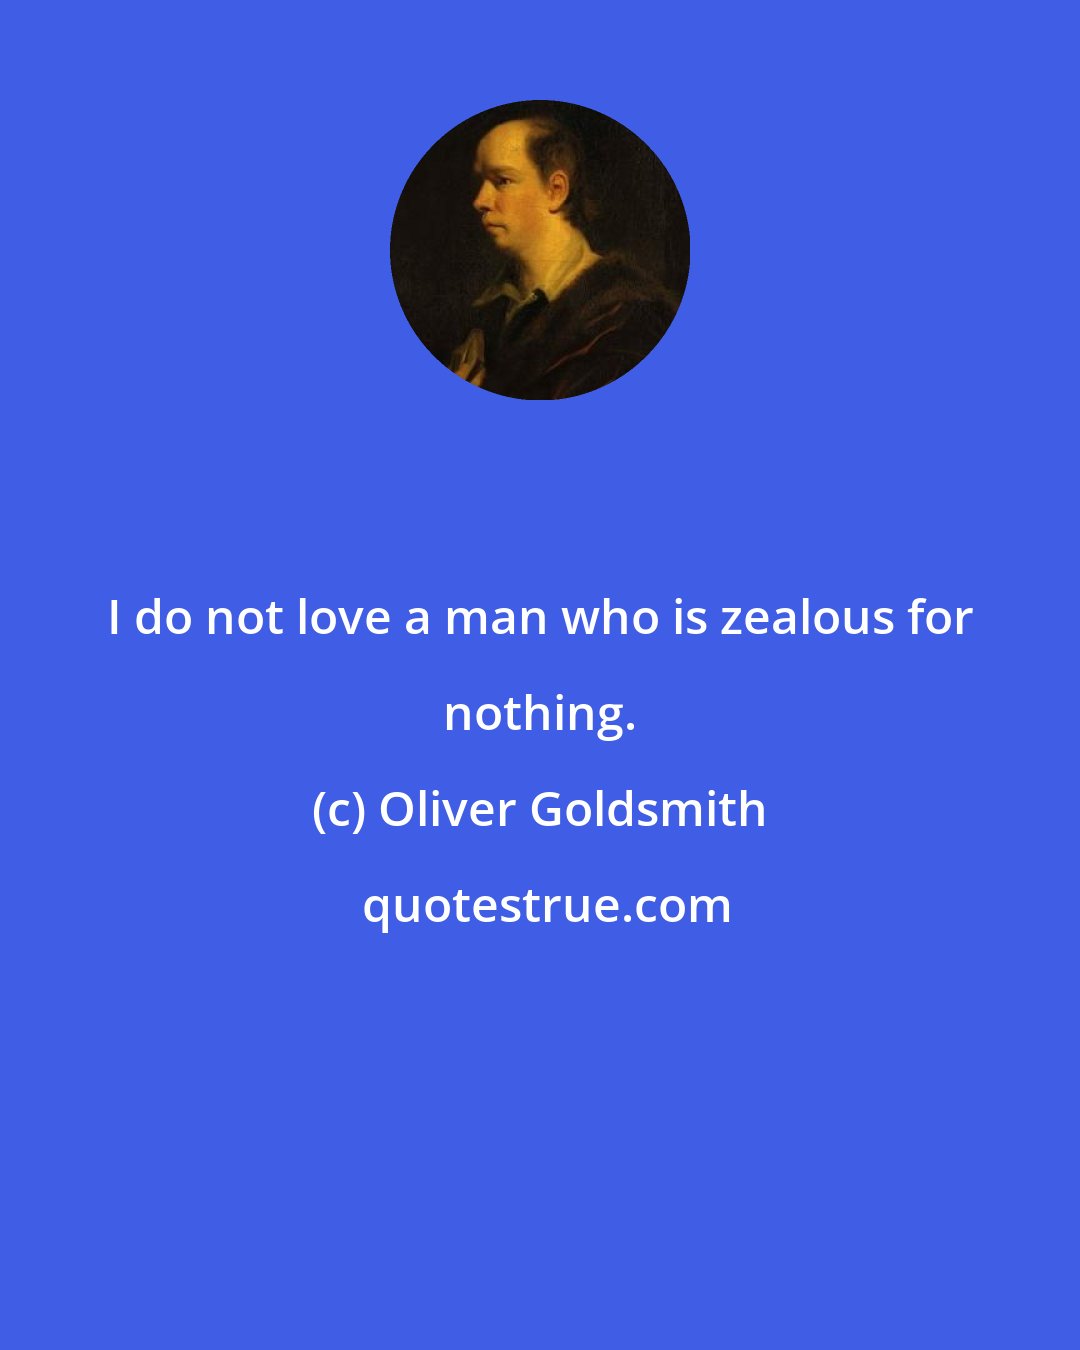 Oliver Goldsmith: I do not love a man who is zealous for nothing.